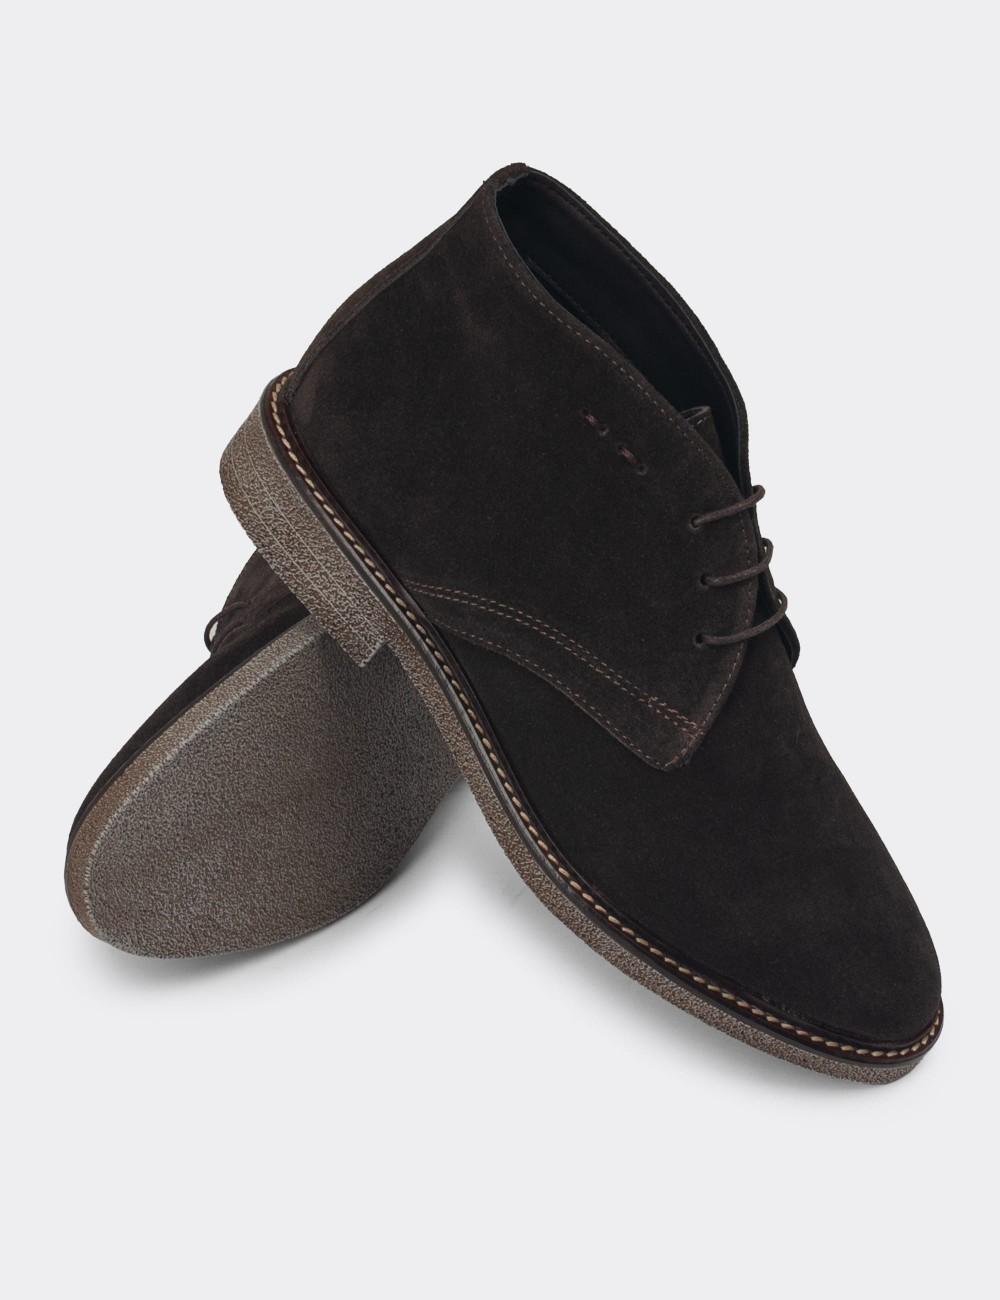 Brown Suede Leather Desert Boots - 01967ZKHVC01